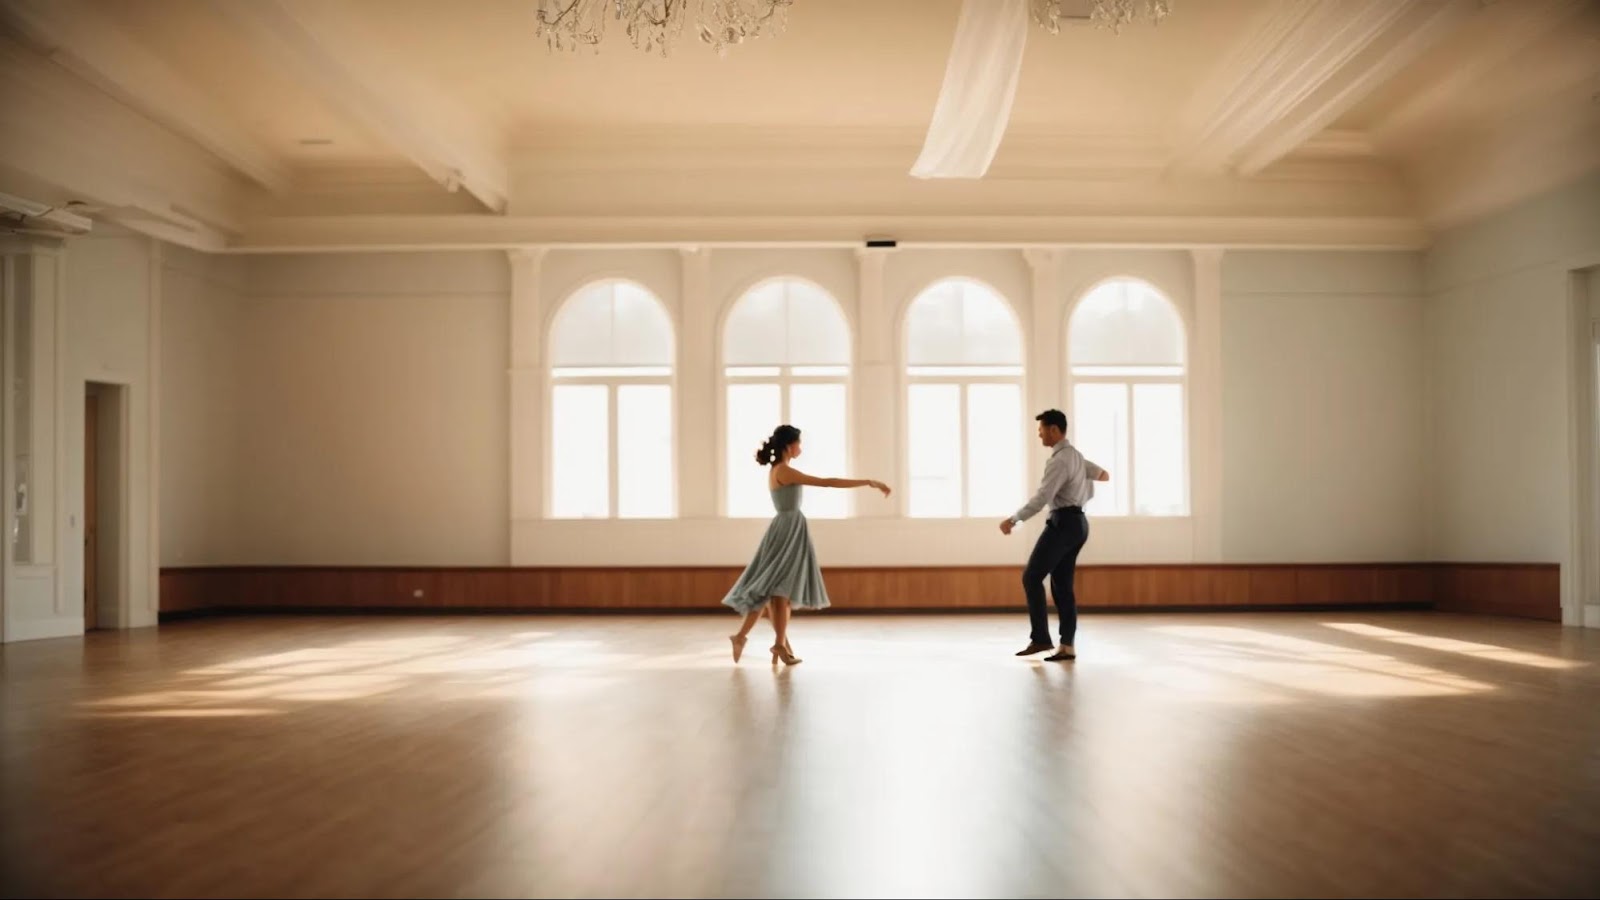 a couple practices their dance in an empty hall, closely embracing as they gracefully move across the floor illuminated by soft, ambient light.